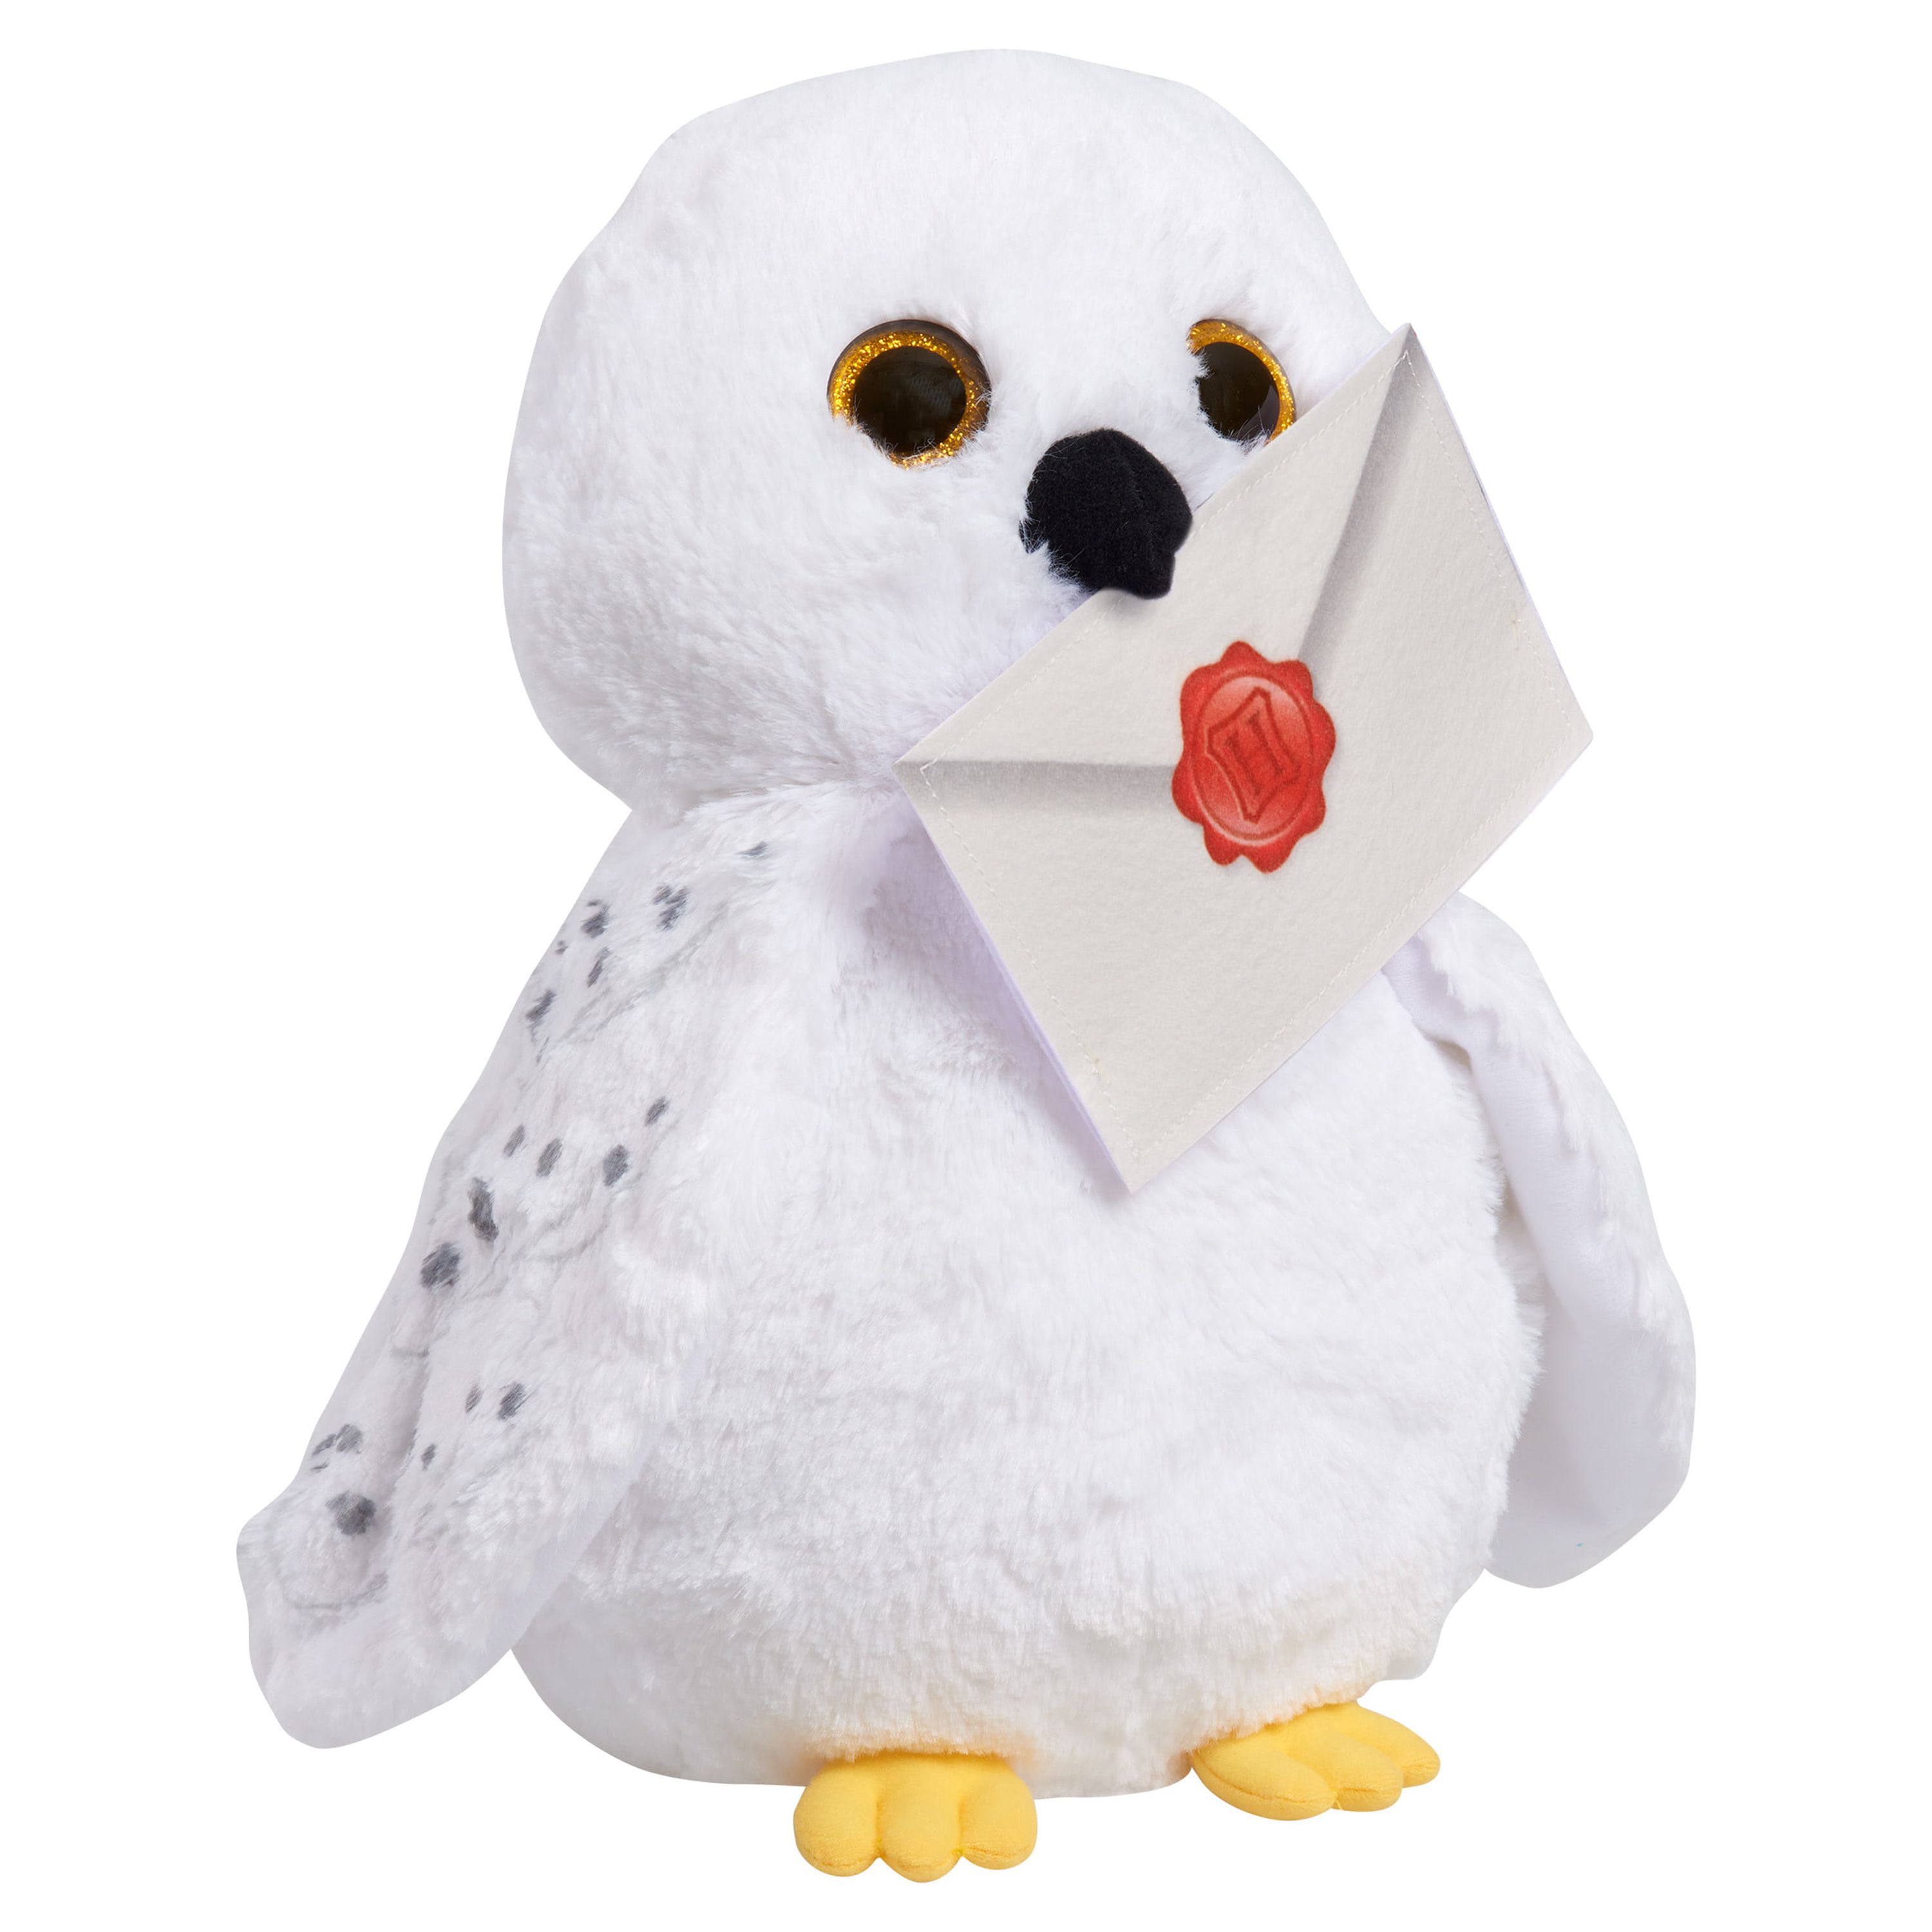 Harry Potter Collector Hedwig Plush Stuffed Owl Toy for Kids, White, Snowy Owl,  Kids Toys for Ages 3 Up, Gifts and Presents - image 4 of 4